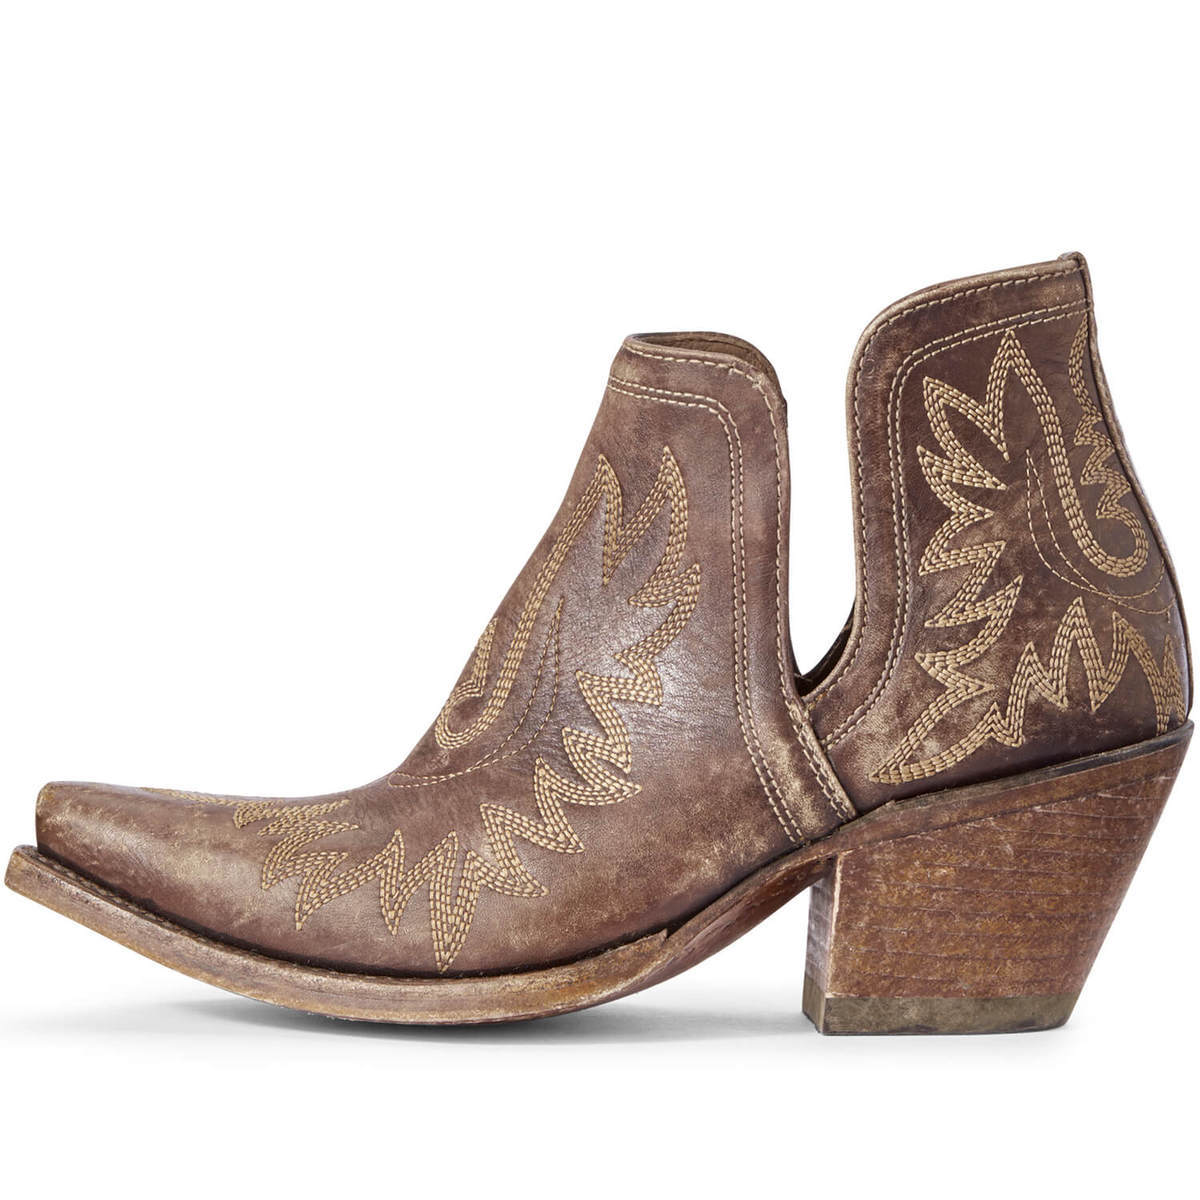 Ariat Women's Dixon Western Boots - Distressed Brown - Size 9 ...